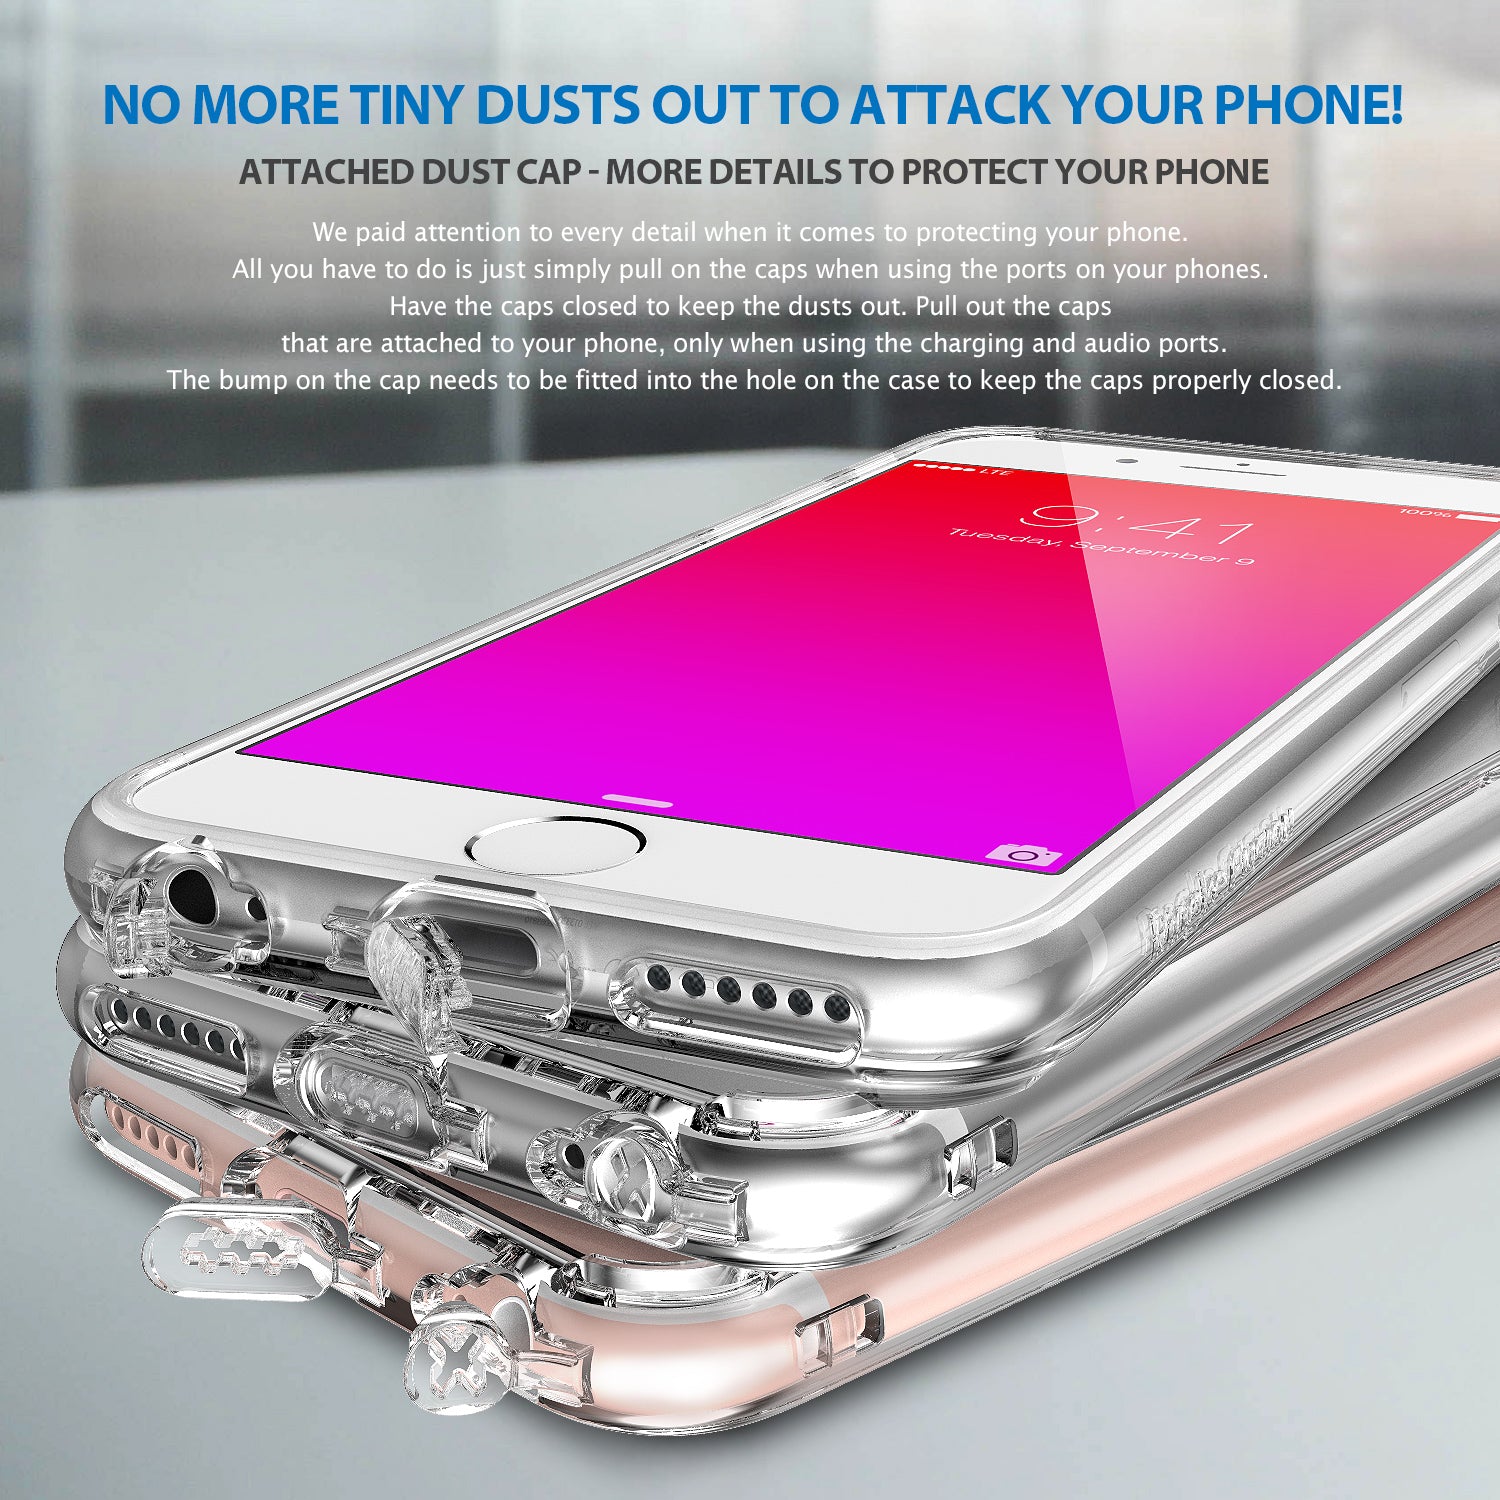 iPhone 6s Plus Case | Fusion - No more tiny dusts out to attack your phone!